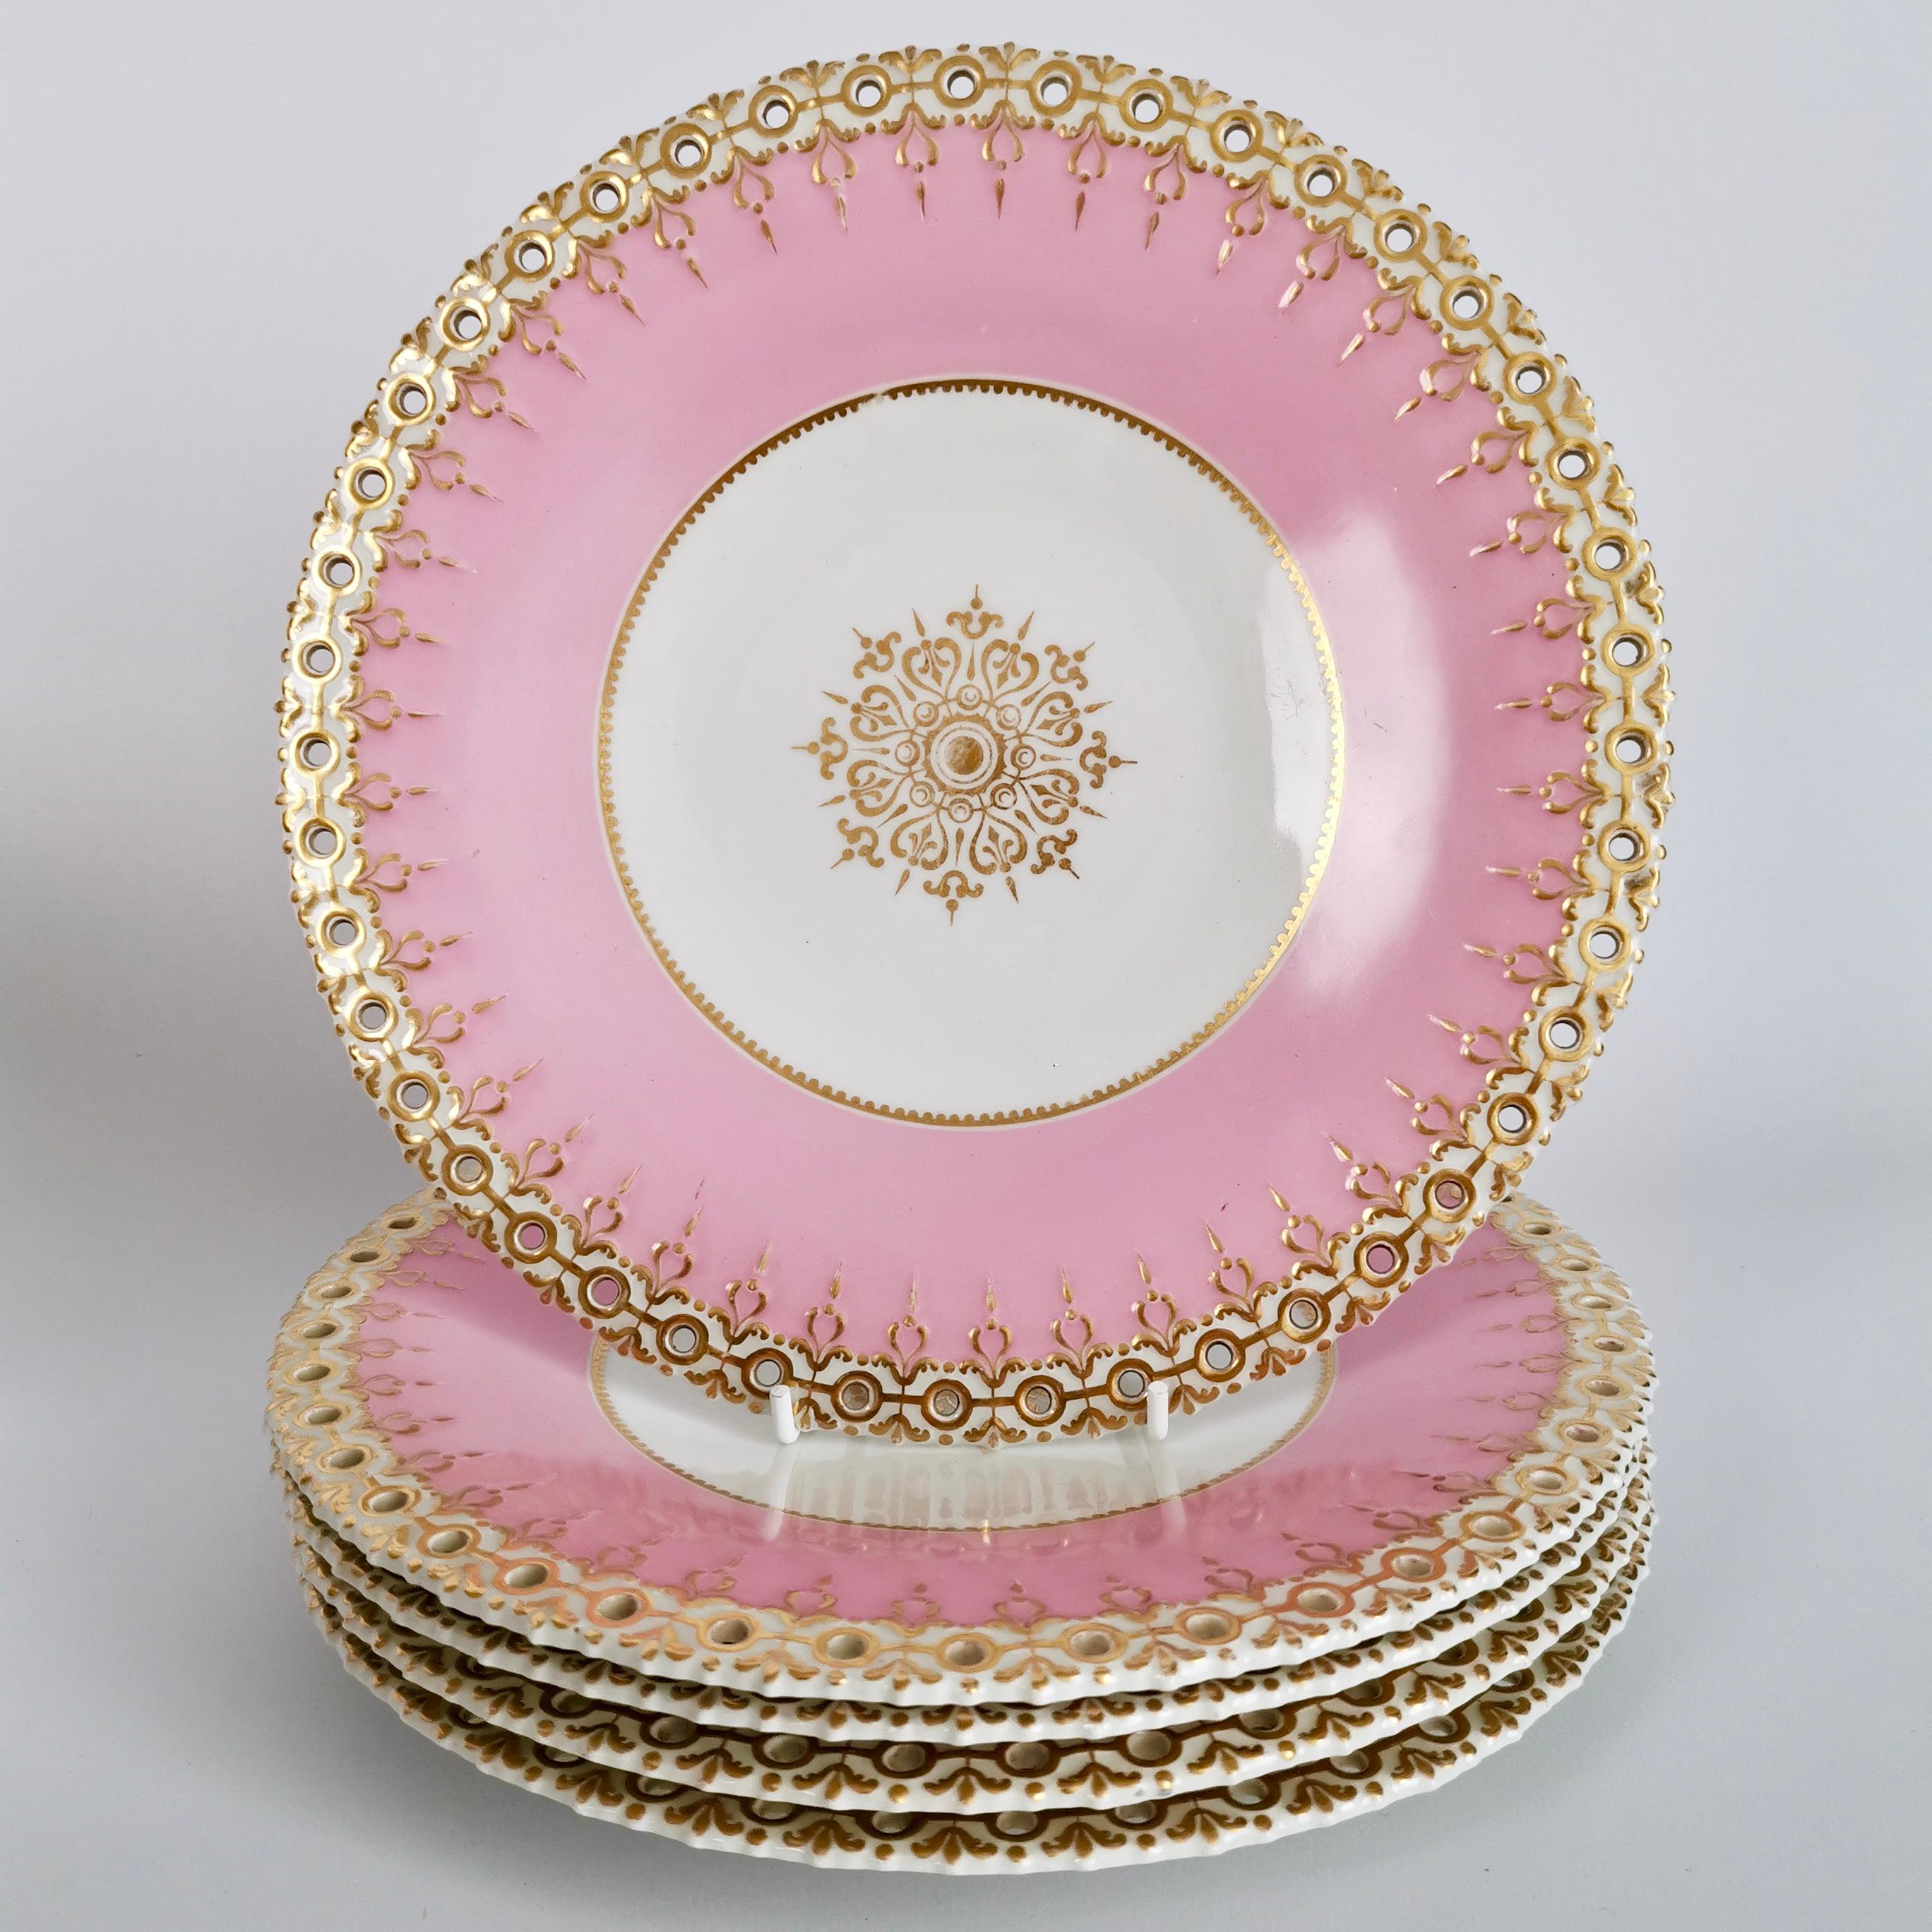 Hand-Painted Pink Porcelain Dessert Service, Spectacular Claw-Footed Tazzas, Victorian